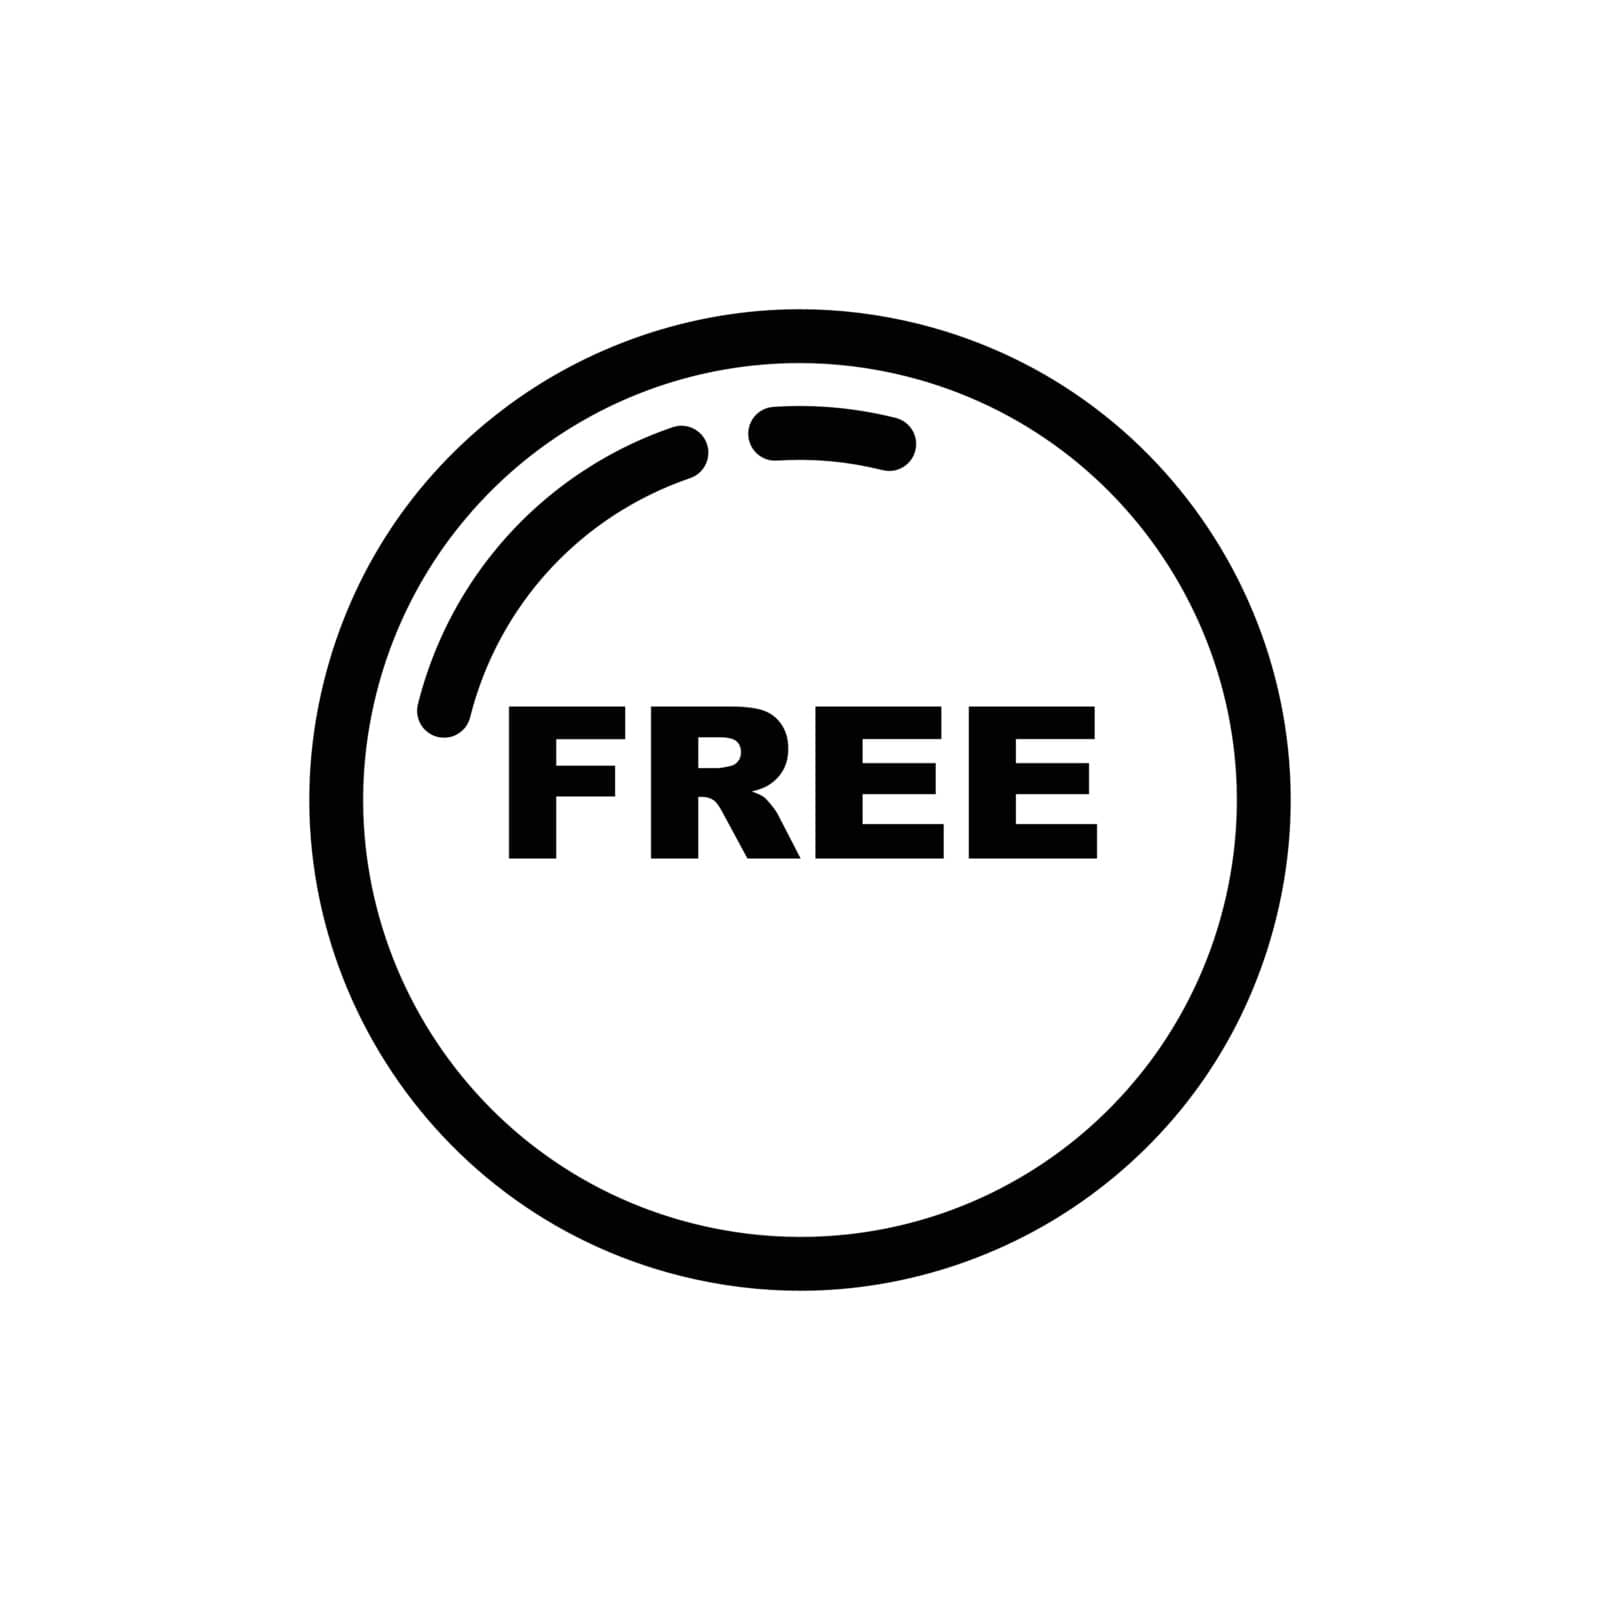 Thin line free icon by ang_bay